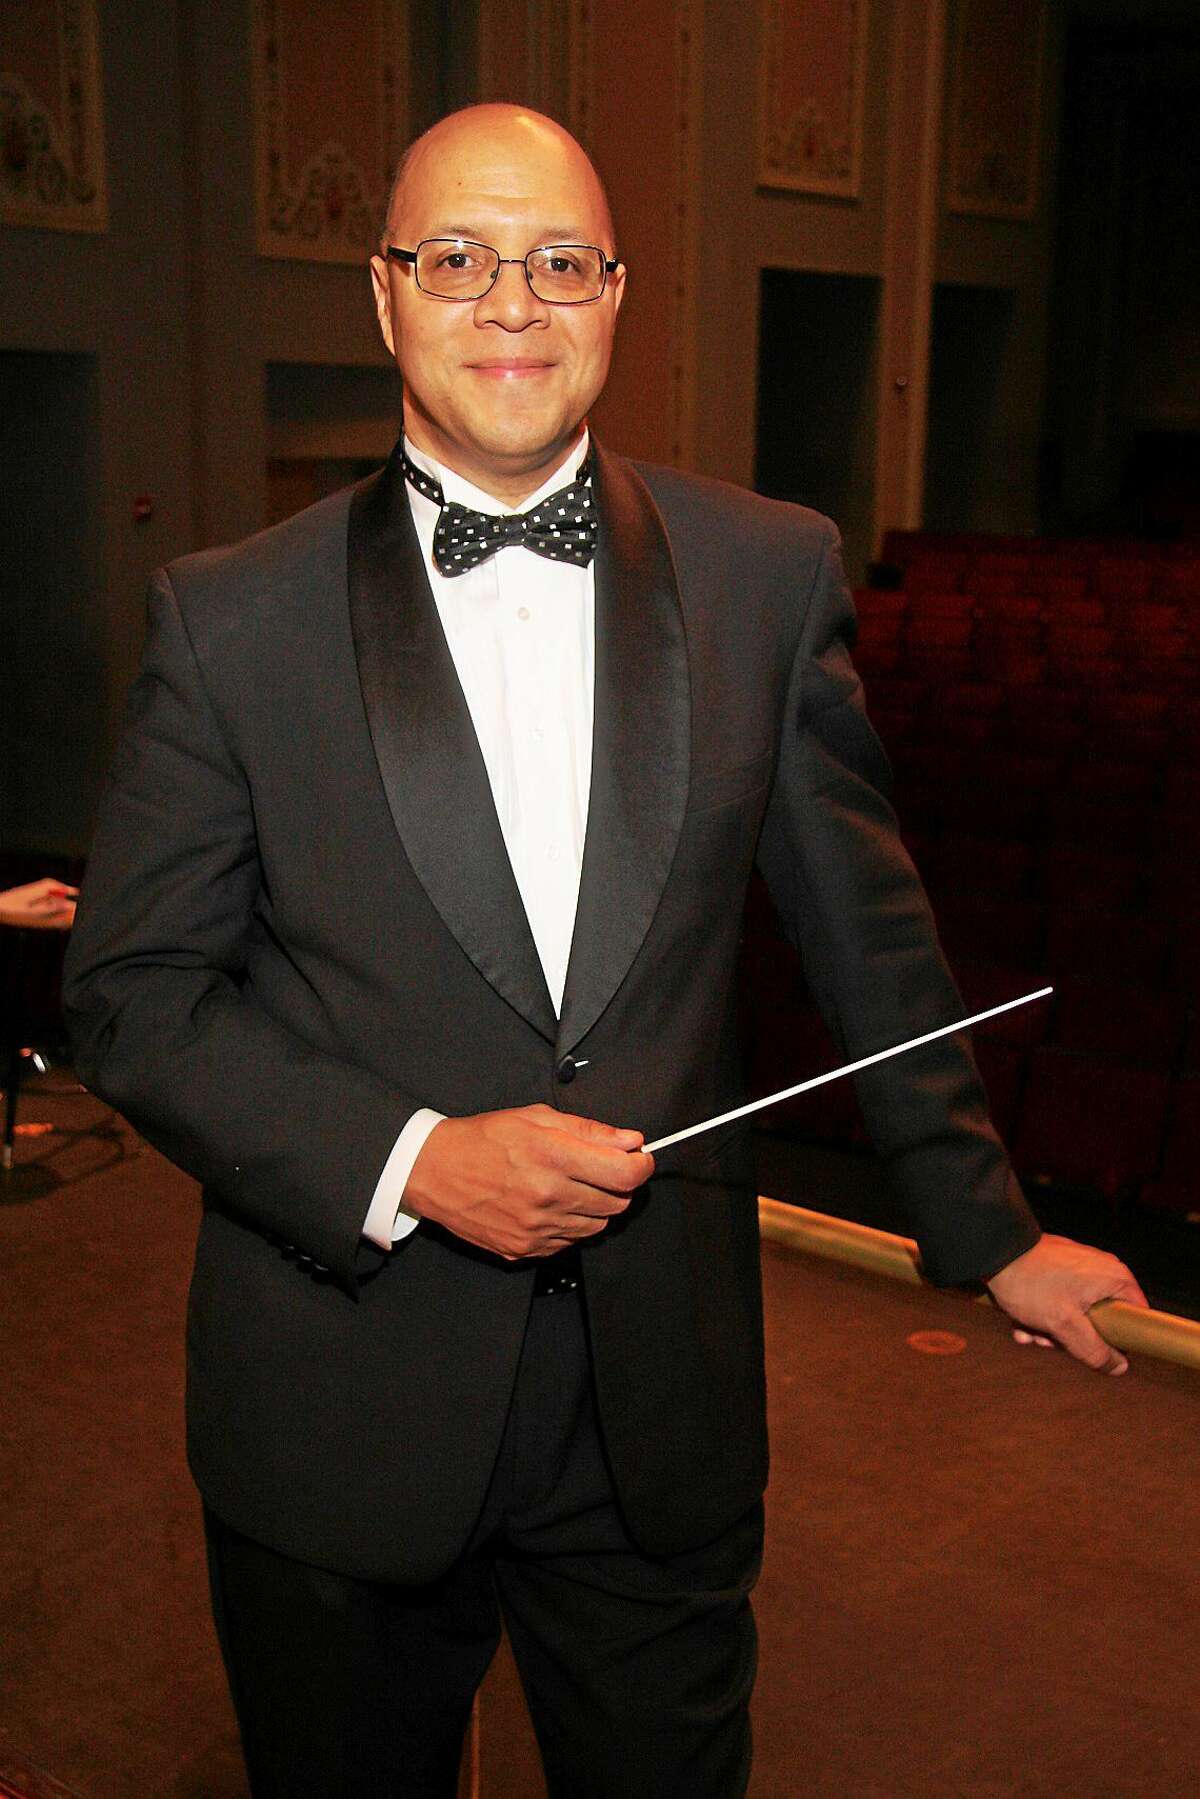 Chelsea Tipton will conduct the NHSO holiday pops concerts in Hamden and Shelton this weekend.